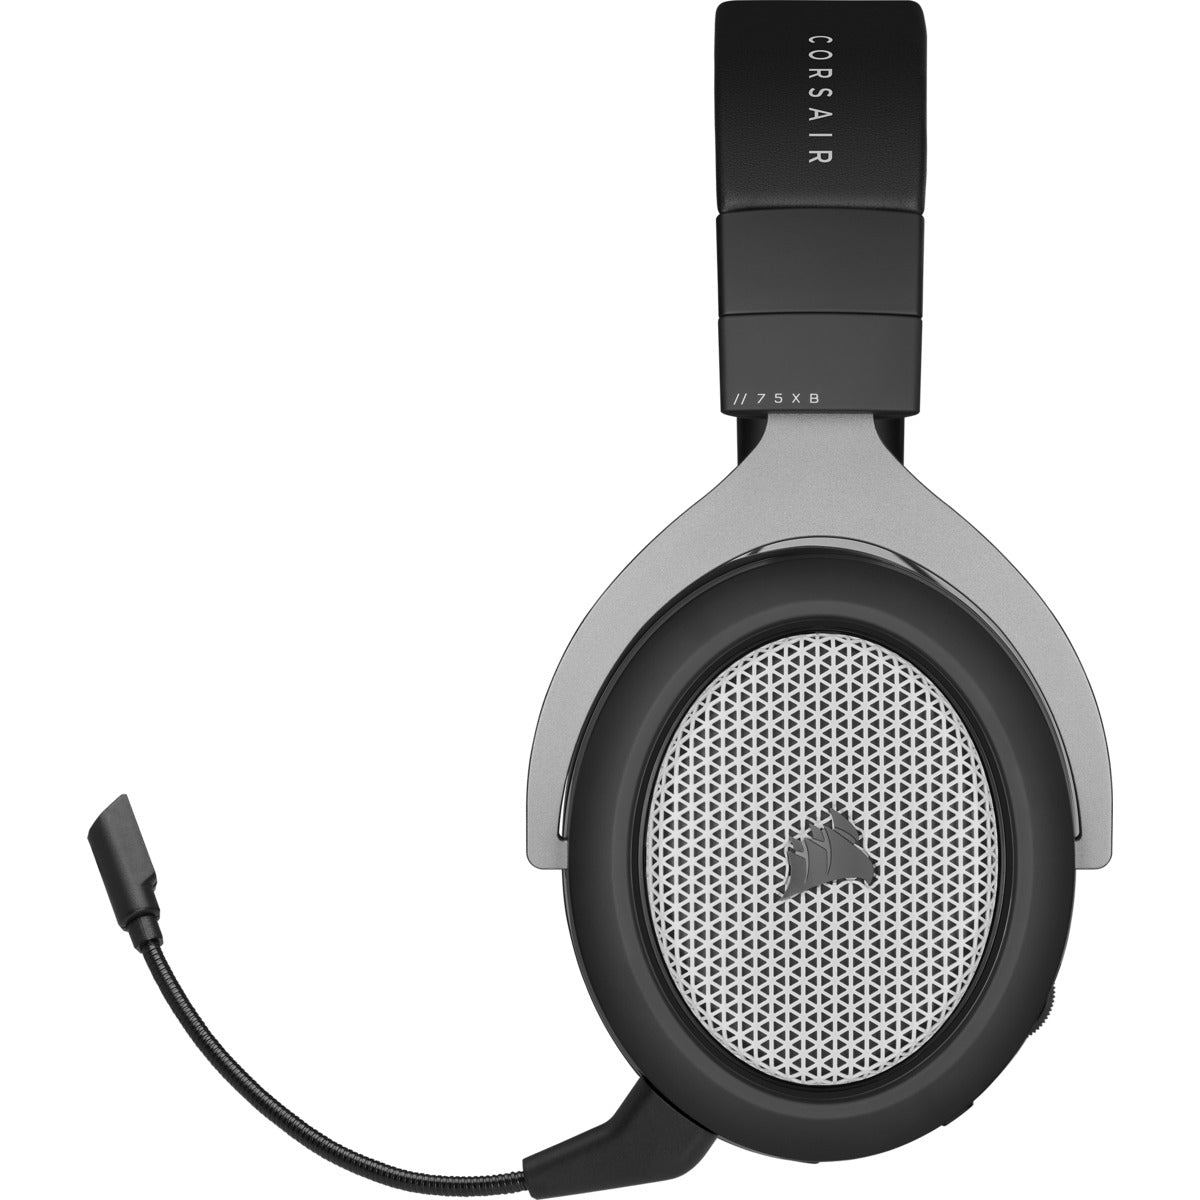 CORSAIR HS75 XB Wireless Gaming Headset Headphones with Dolby Atmos Support, Detachable Unidirectional Noise-Cancelling Microphone, 30ft Max Wireless Range for XBox Series X and XBox One Game Consoles | CA-9011222-AP